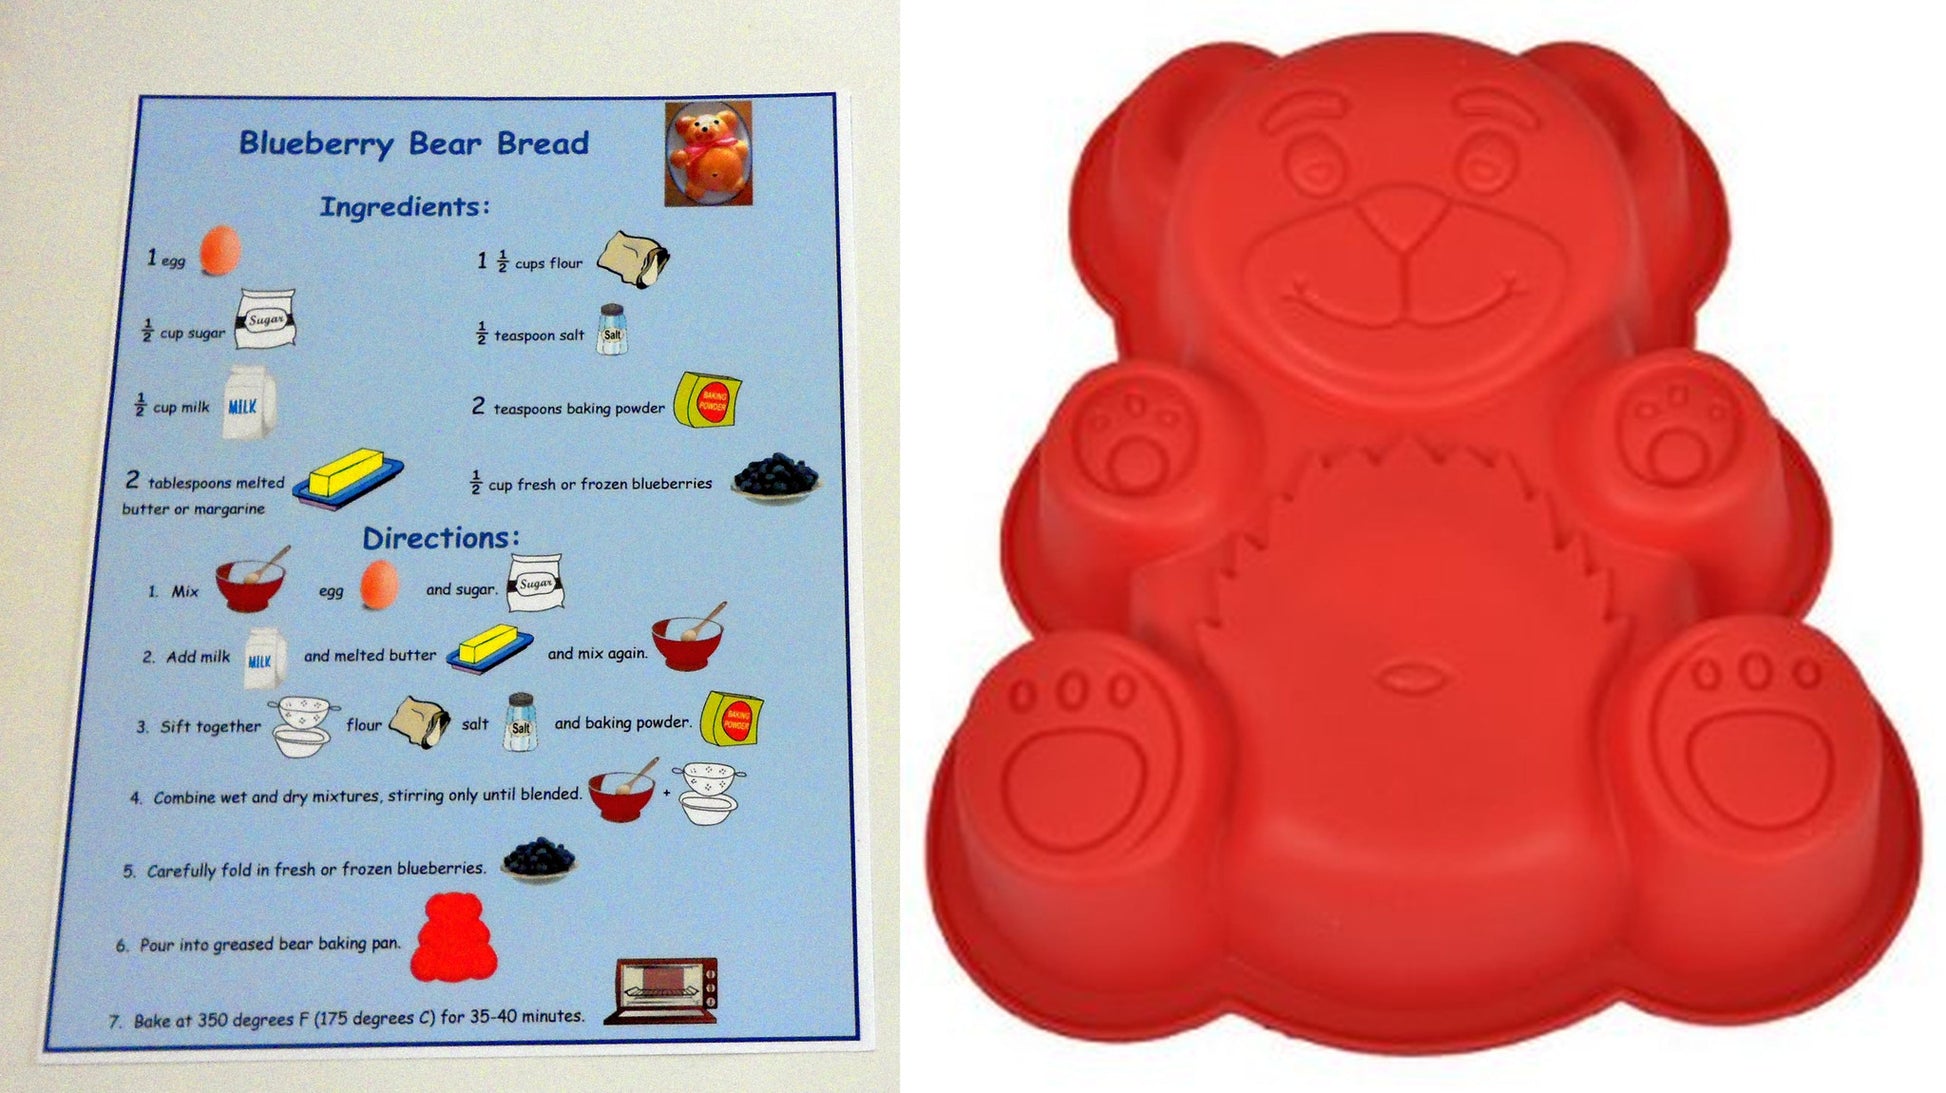 Bear mold - Blueberries For Sal by Robert McCloskey - Ivy Kids subscription box activities.